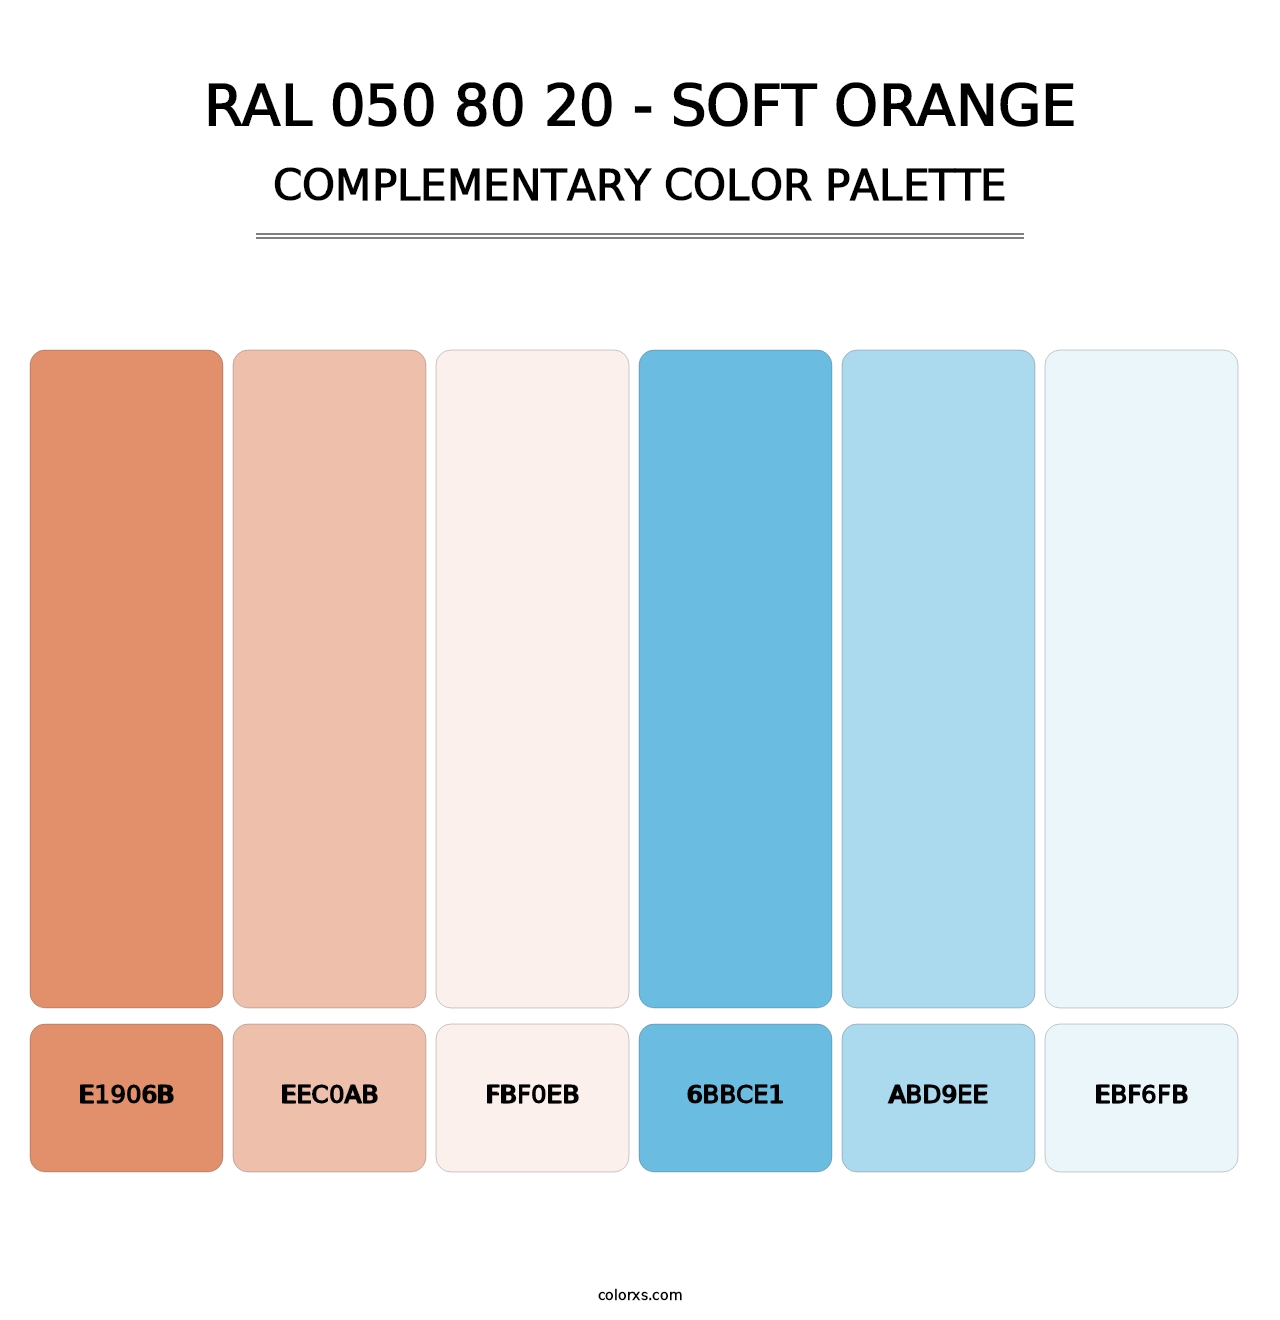 RAL 050 80 20 - Soft Orange - Complementary Color Palette